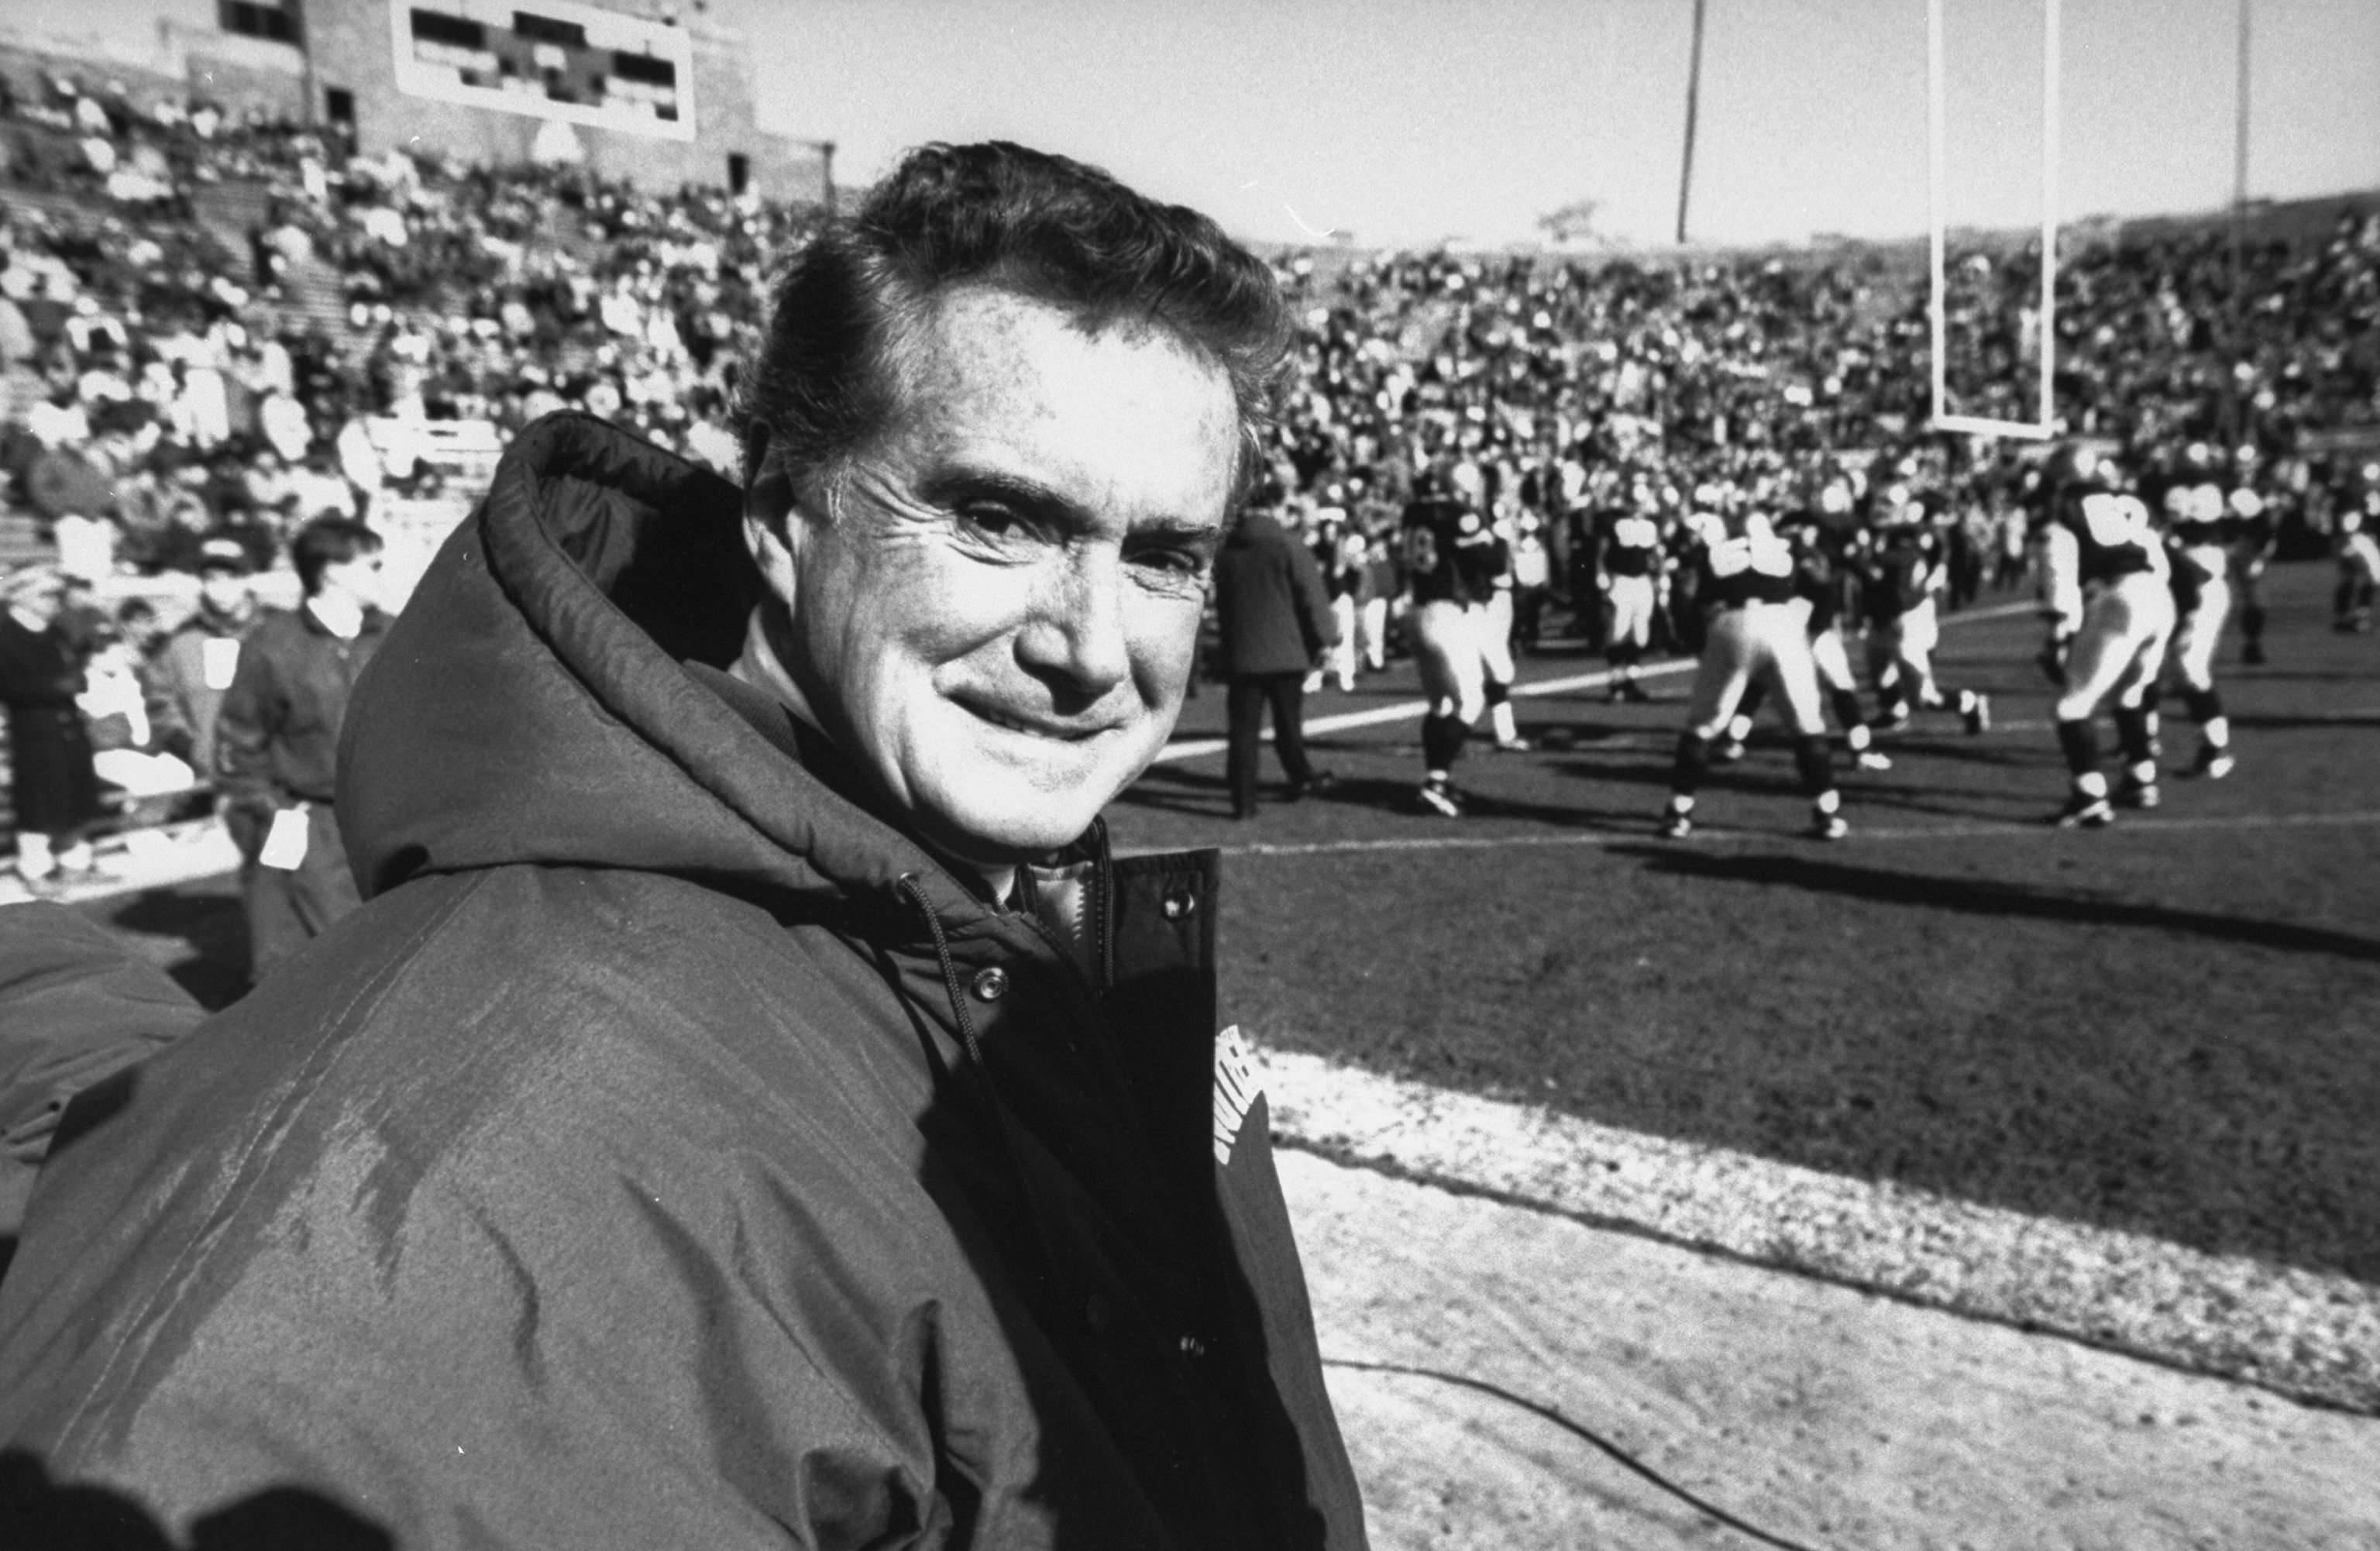 Regis Philbin attending a University of Notre Dame football game in the 1990s